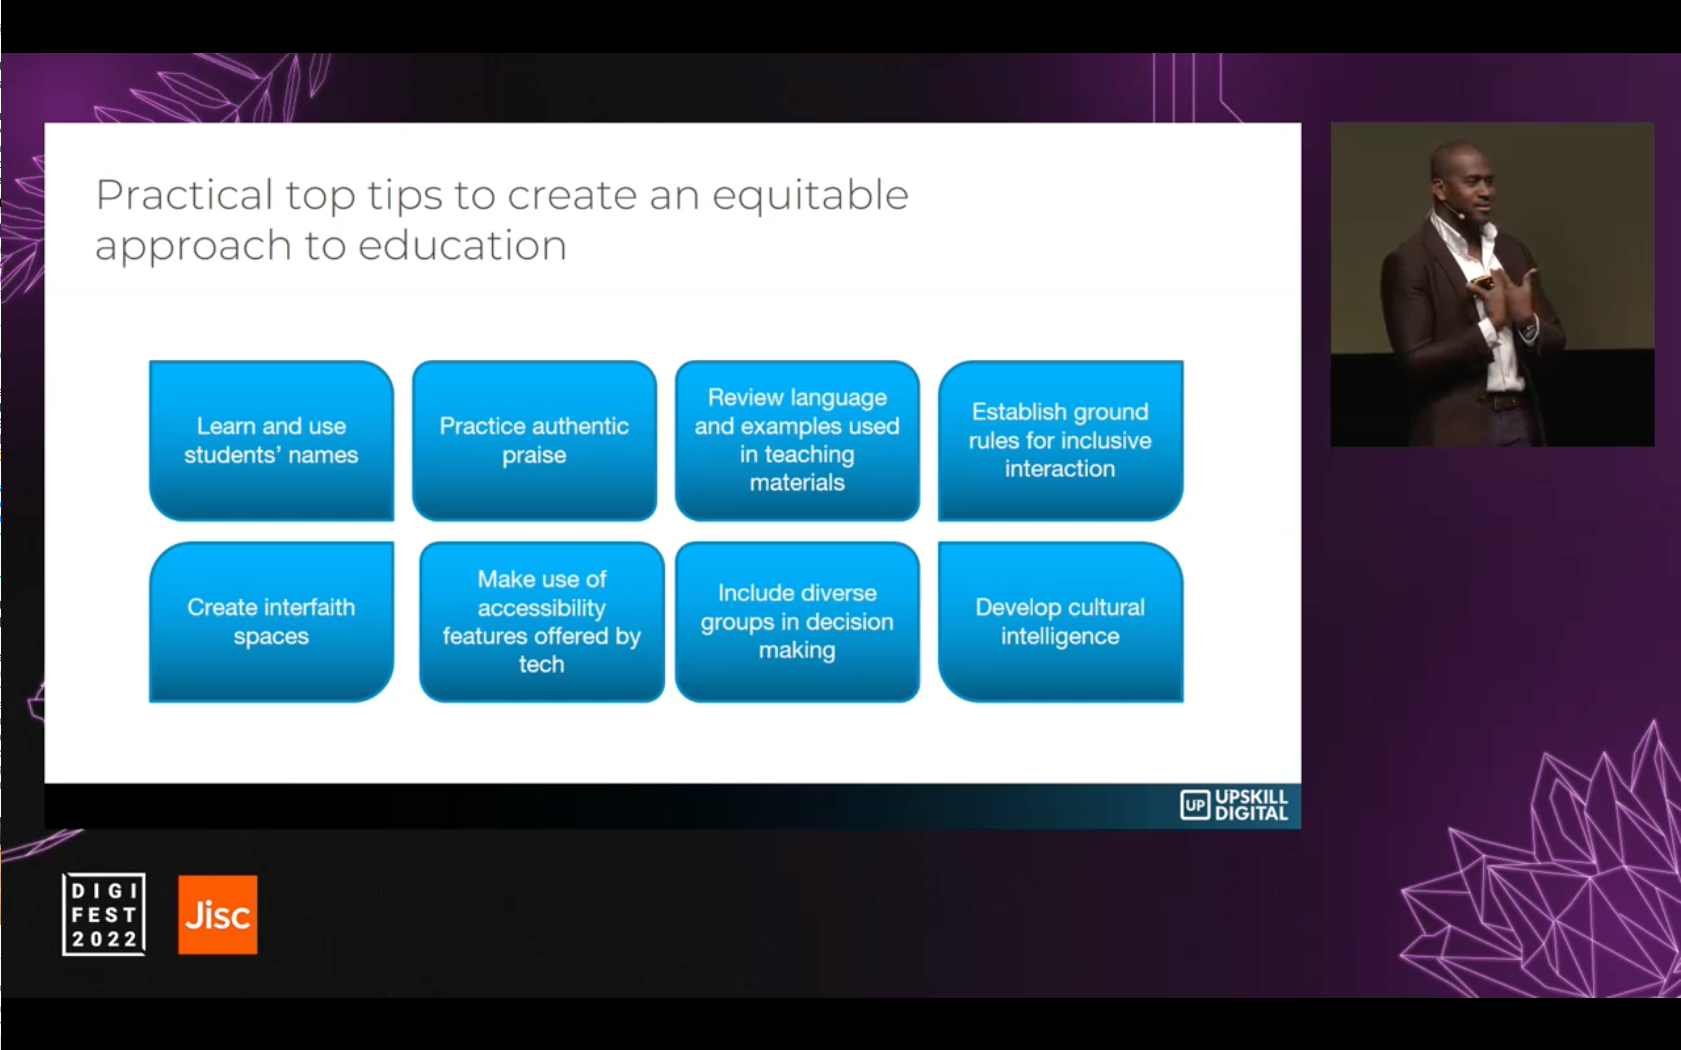 Screenshot from Gori Yahaya's presetnation at Digifest about creating equitable approaches to education. Includes eight tips for doing so.